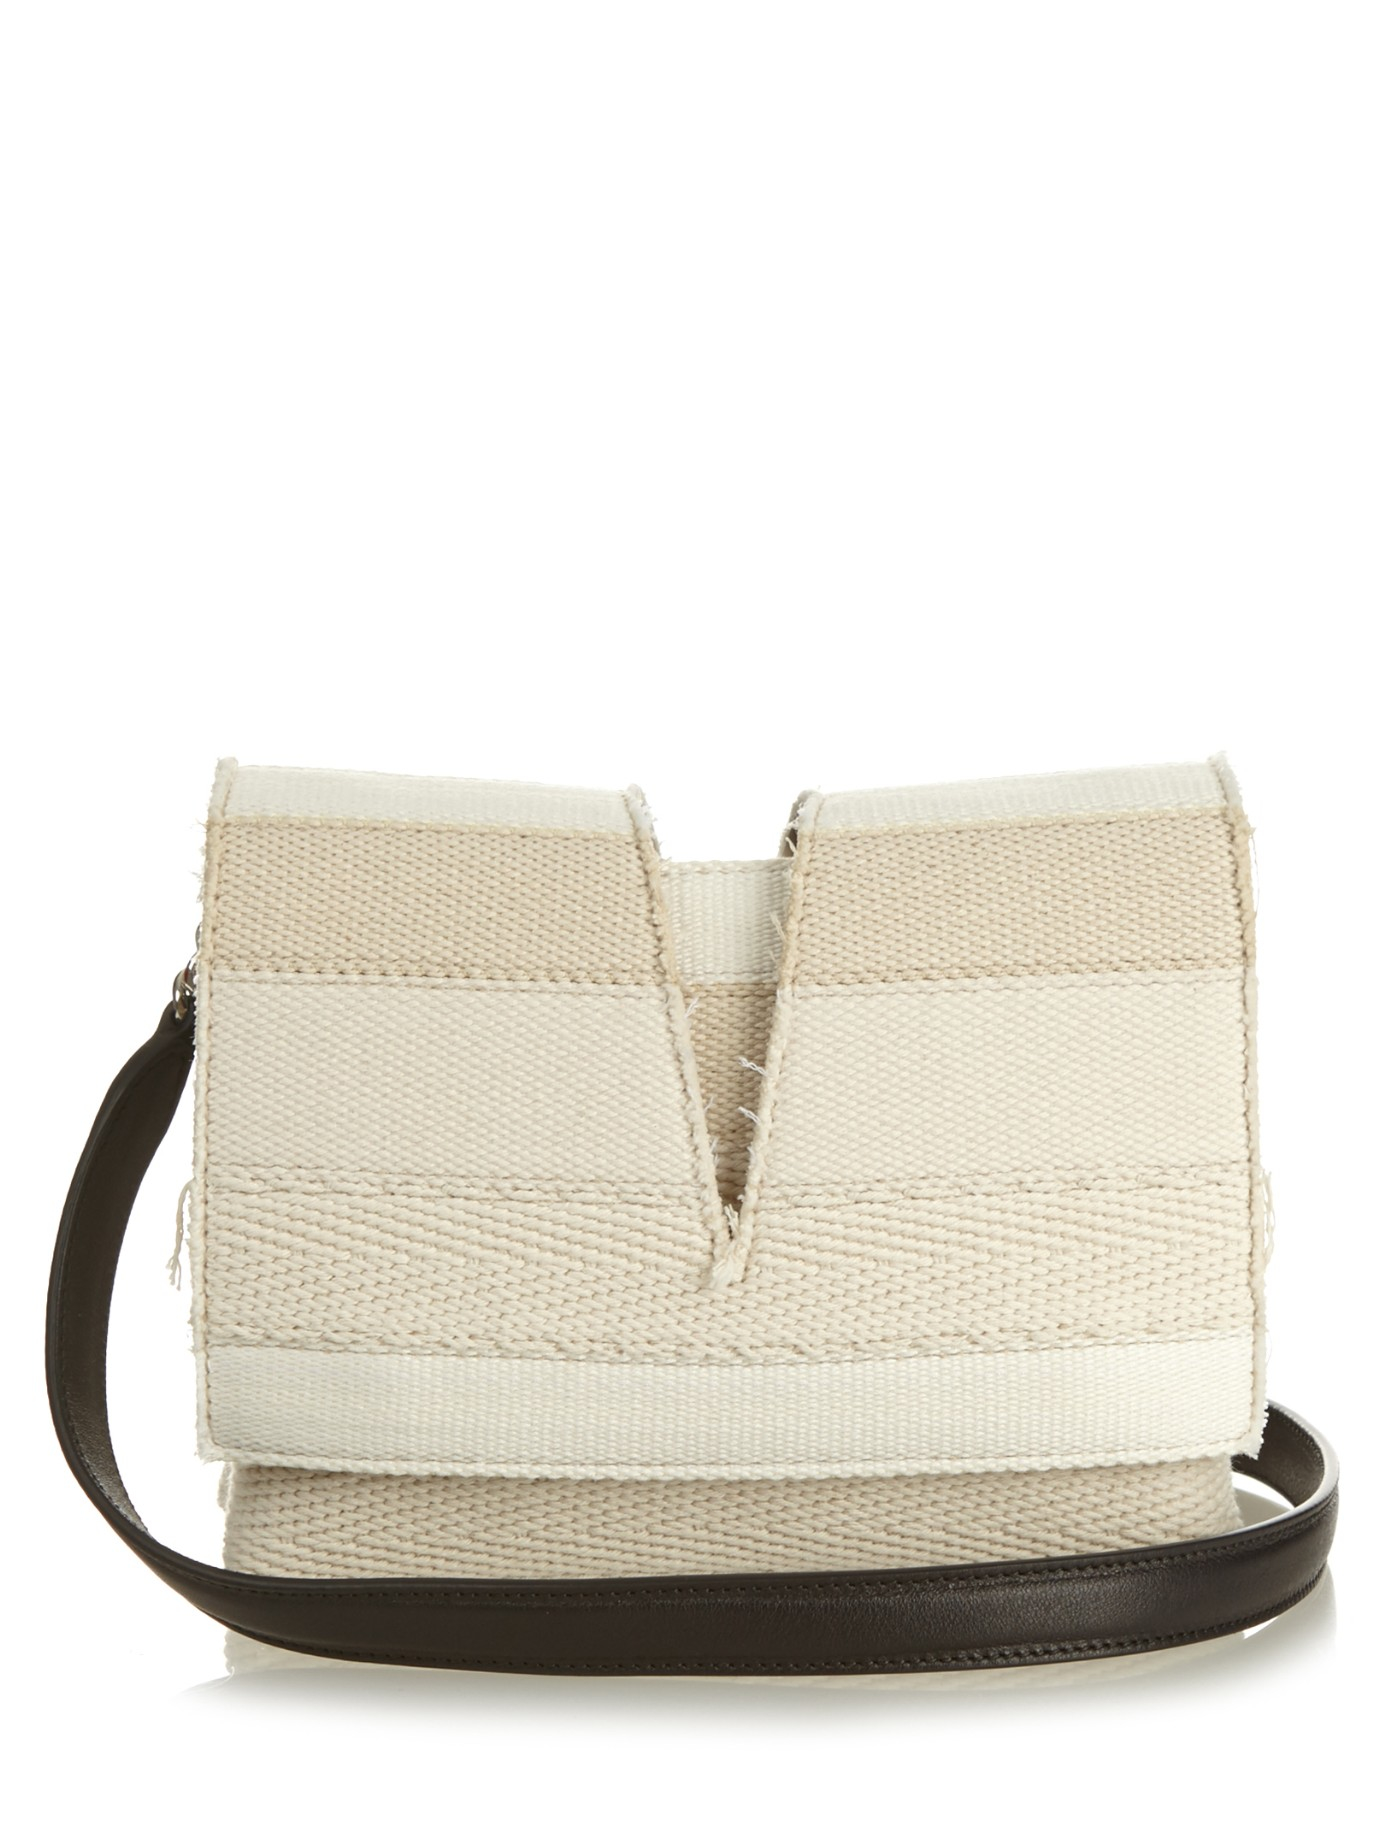 Lyst - Jil Sander View Small Striped Canvas Cross-body Bag in Natural